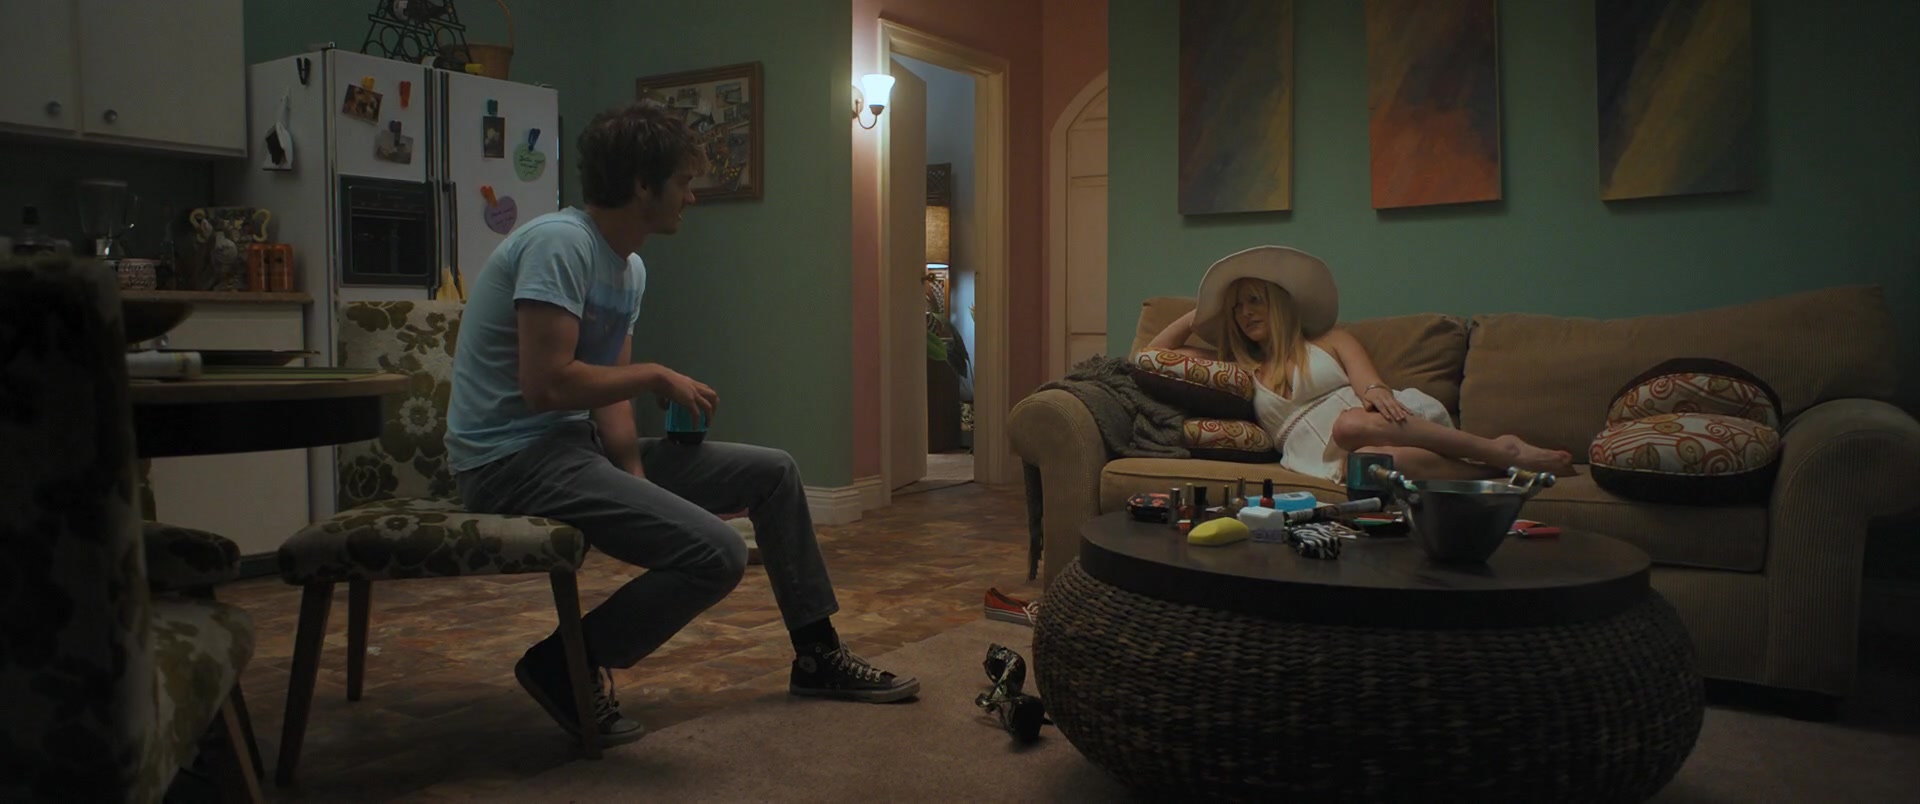 Converse Shoes Worn By Andrew Garfield In Under The Silver Lake (2018)